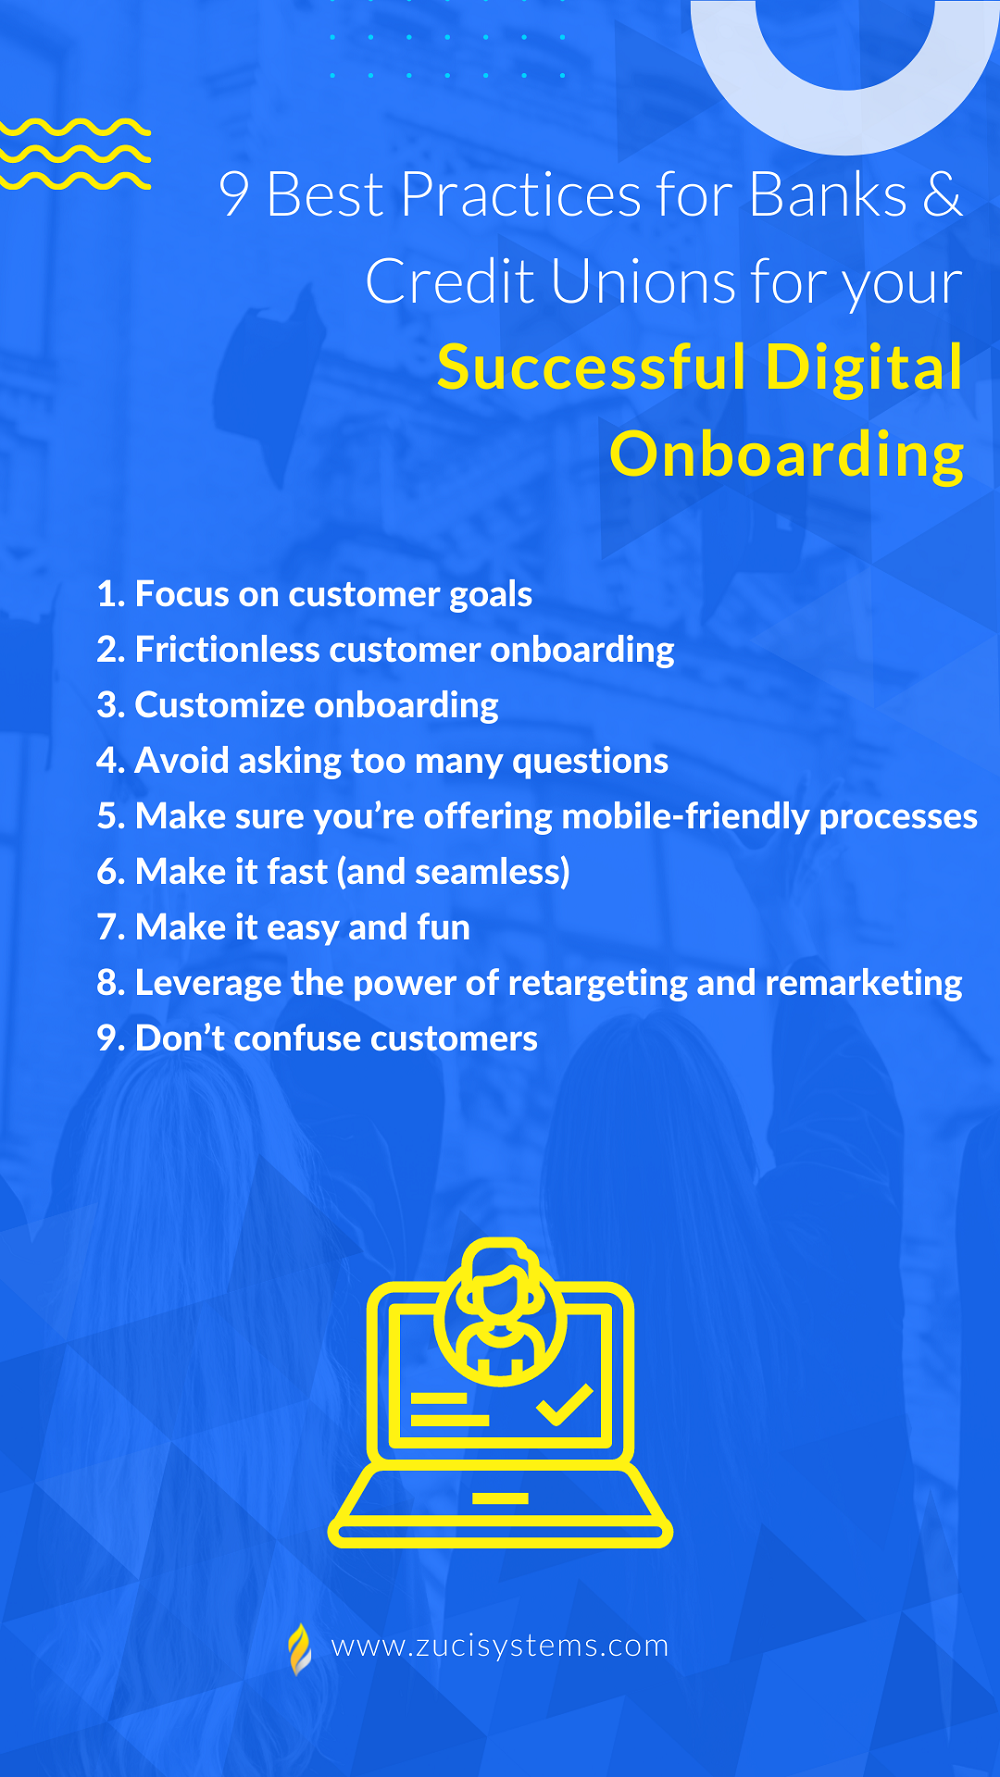 9 Best Practices for Banks & Credit Unions for a Successful Digital Onboarding